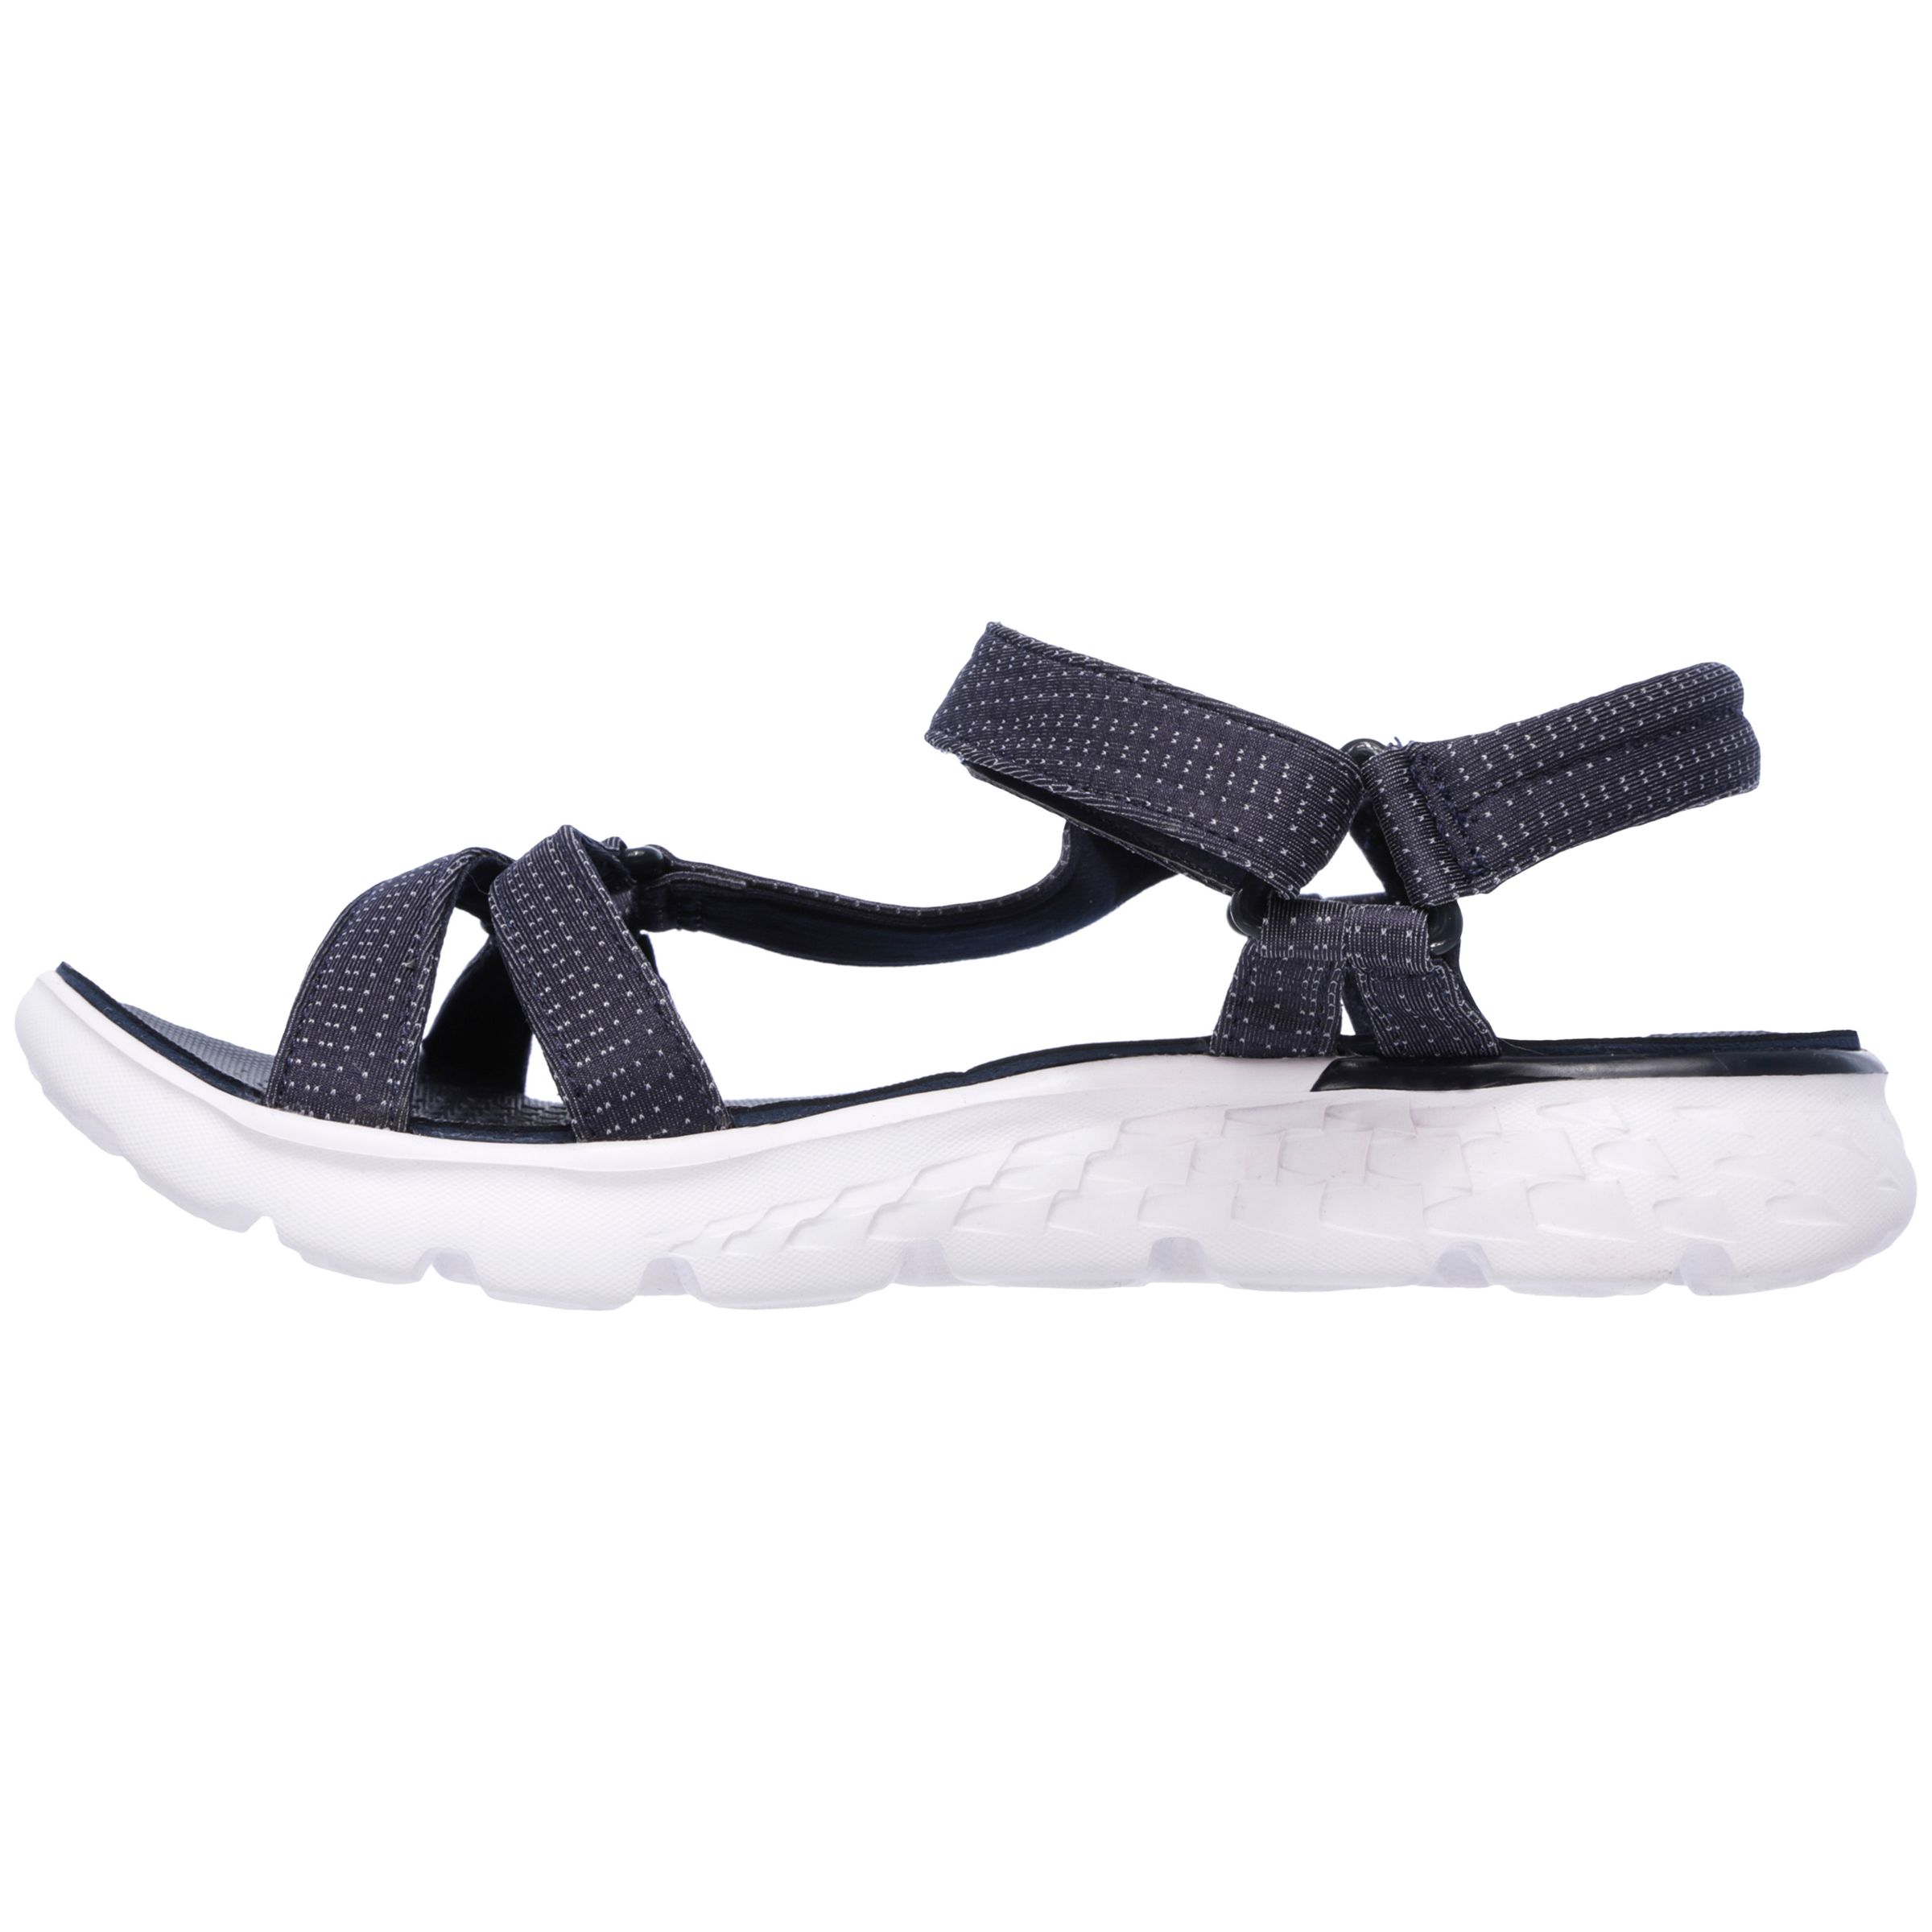 skechers on the go sandals radiance